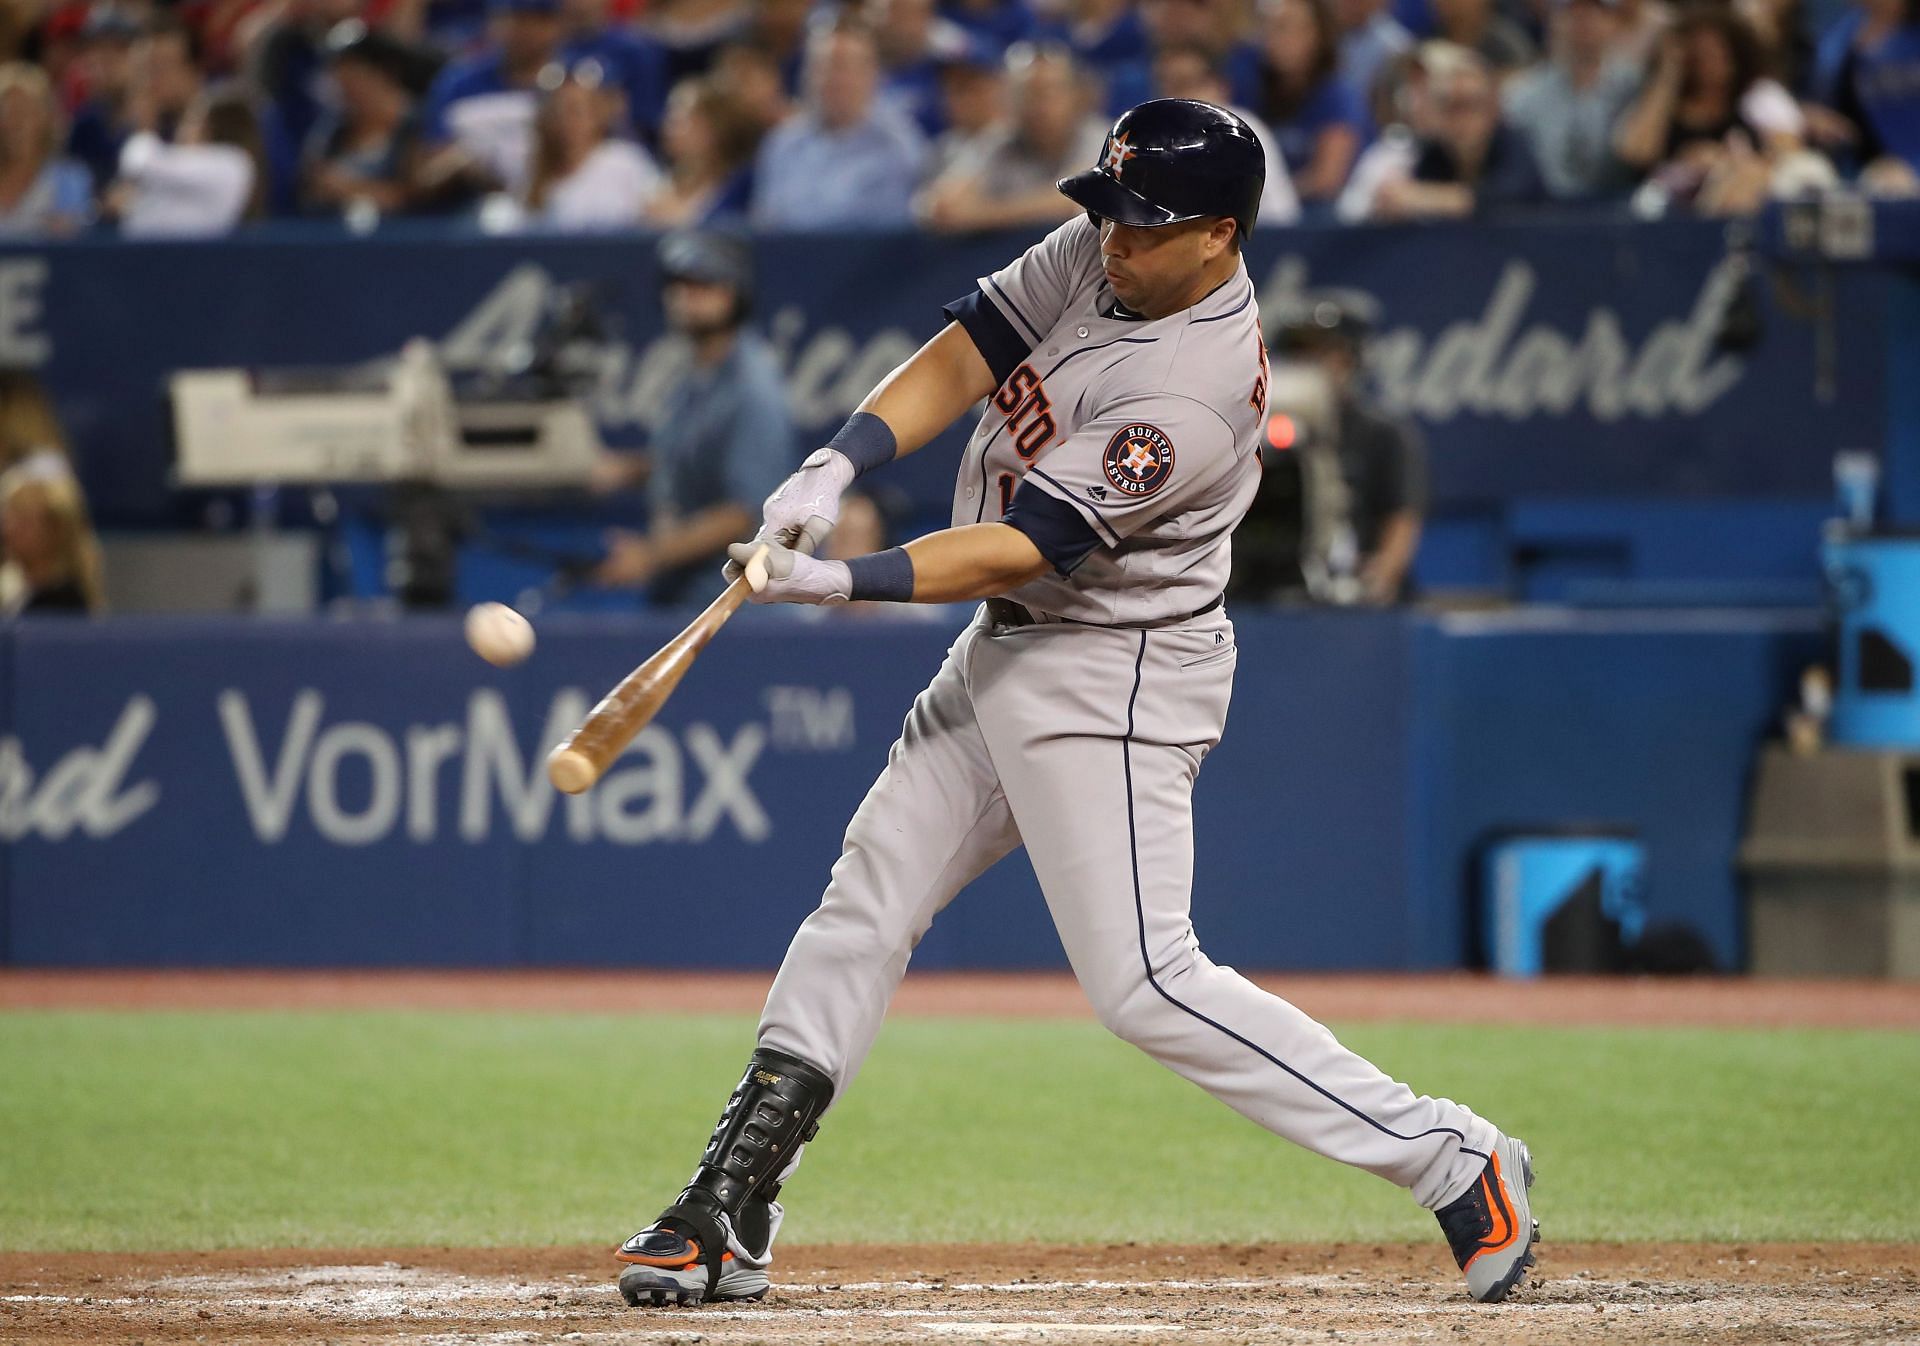 The case for Carlos Beltran as a Baseball Hall of Famer